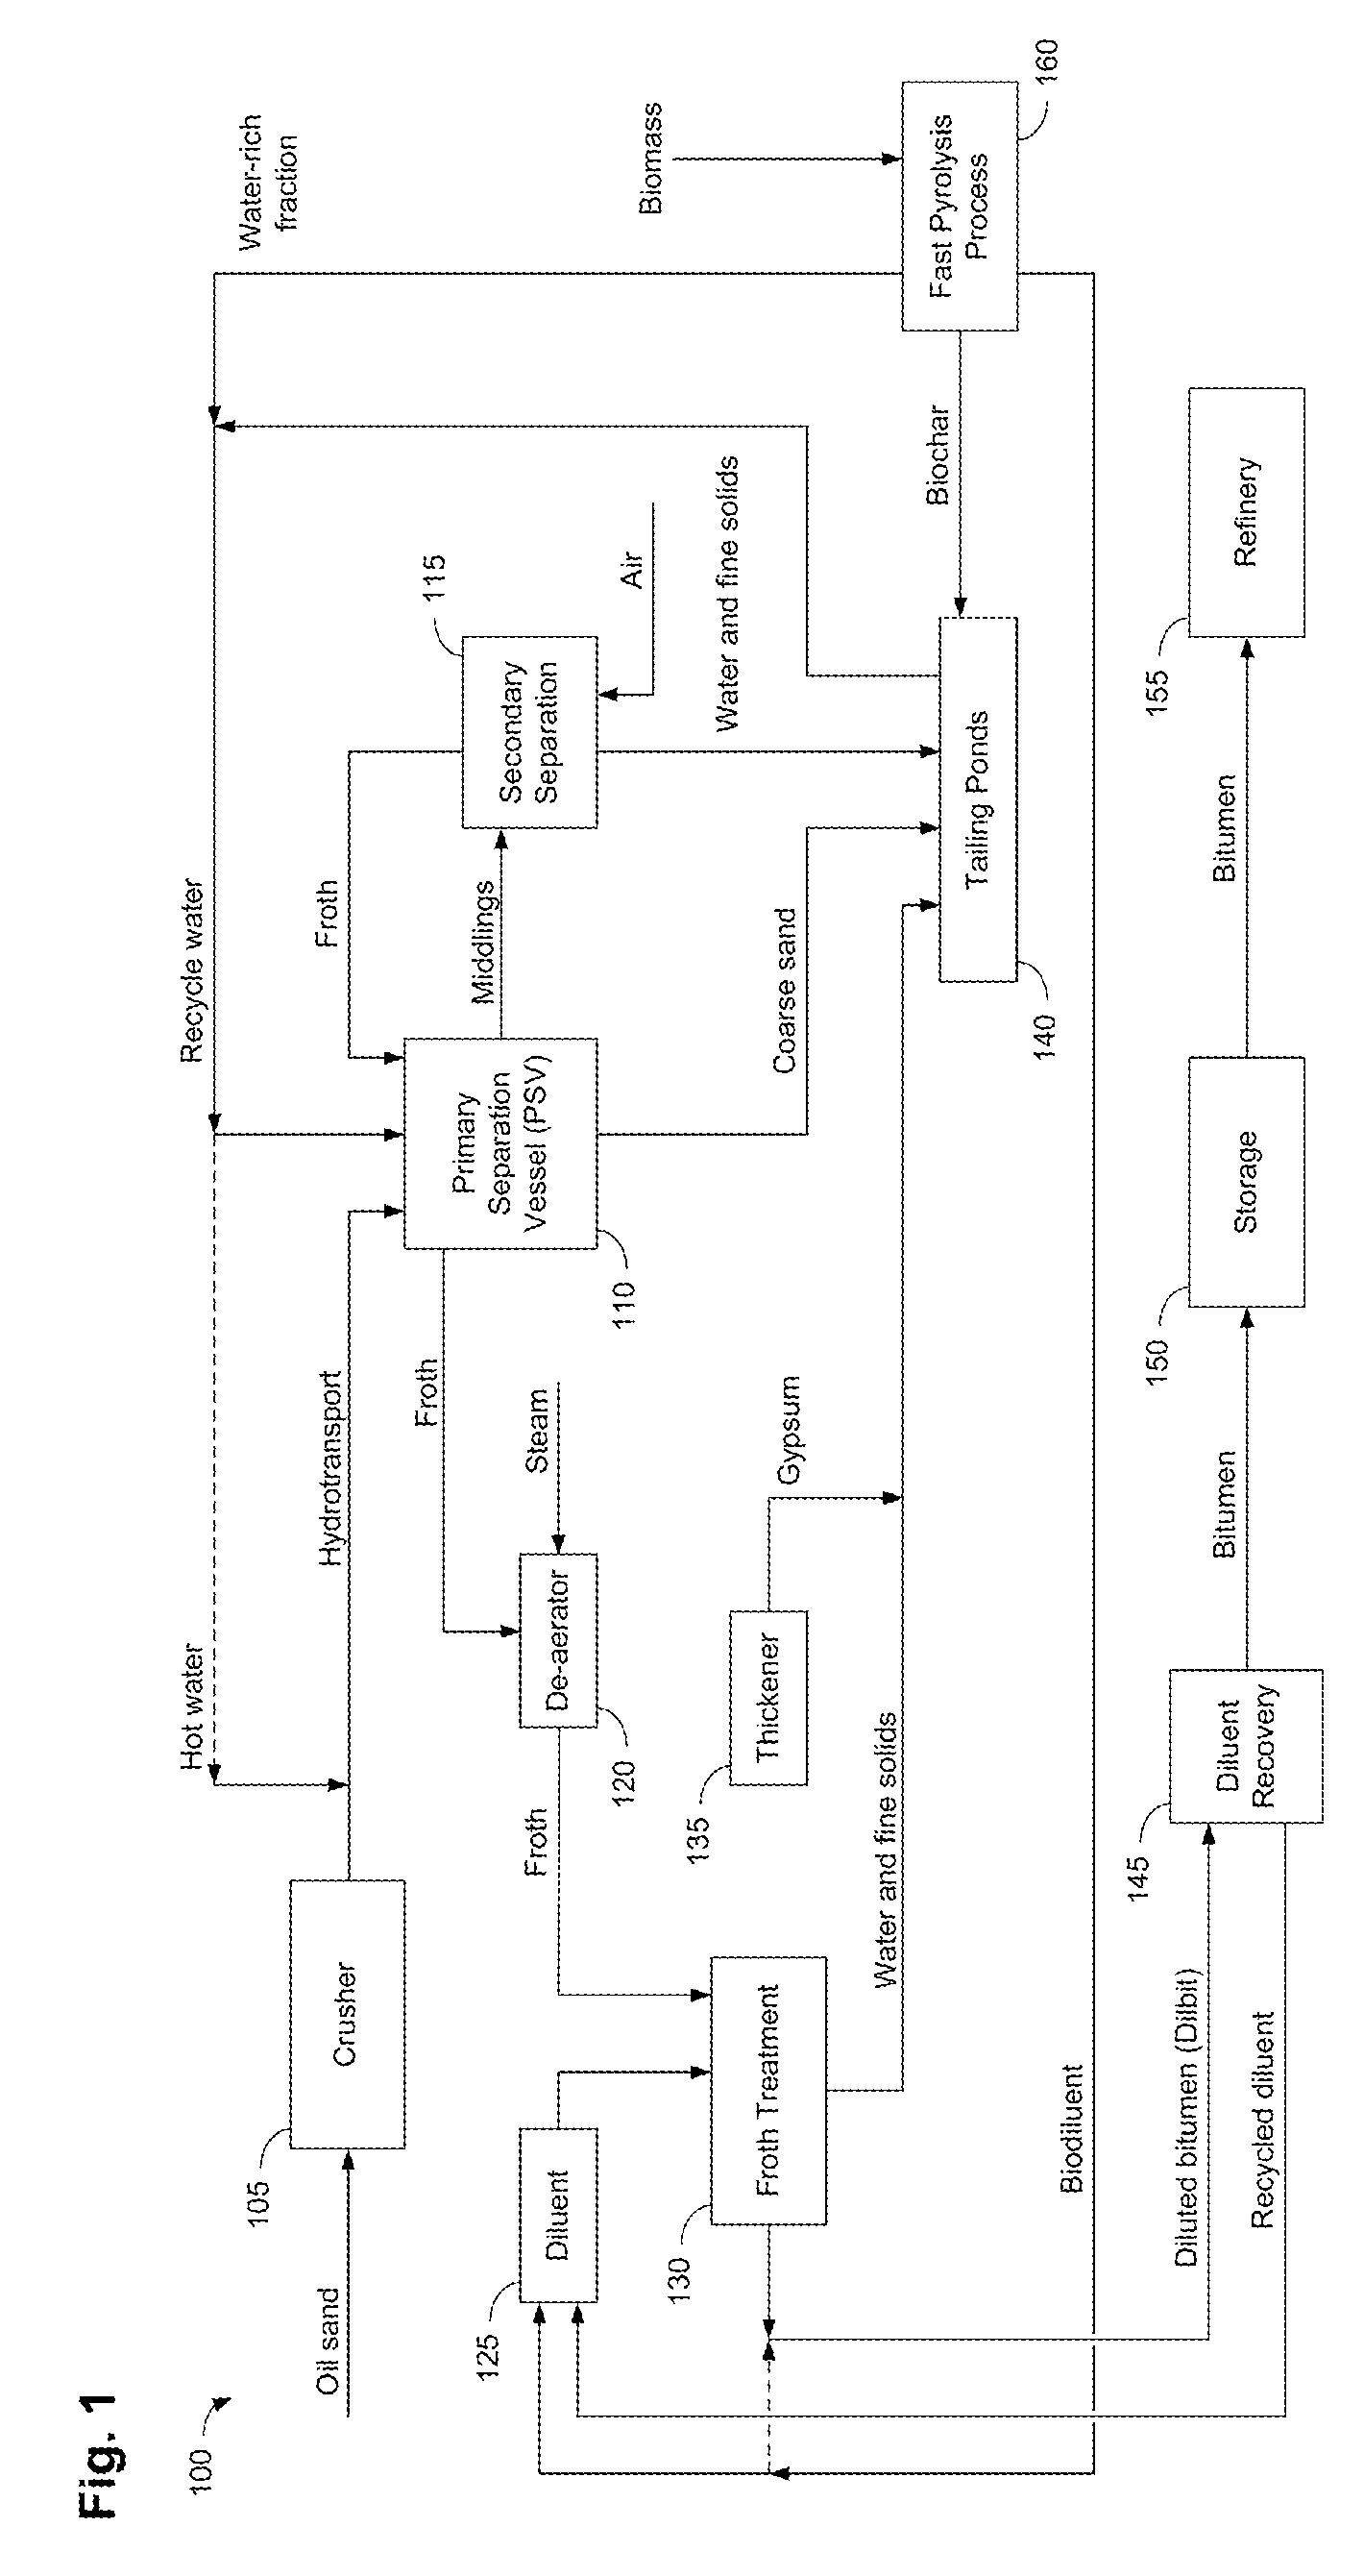 Methods, apparatus, and systems for incorporating bio-derived materials into oil sands processing